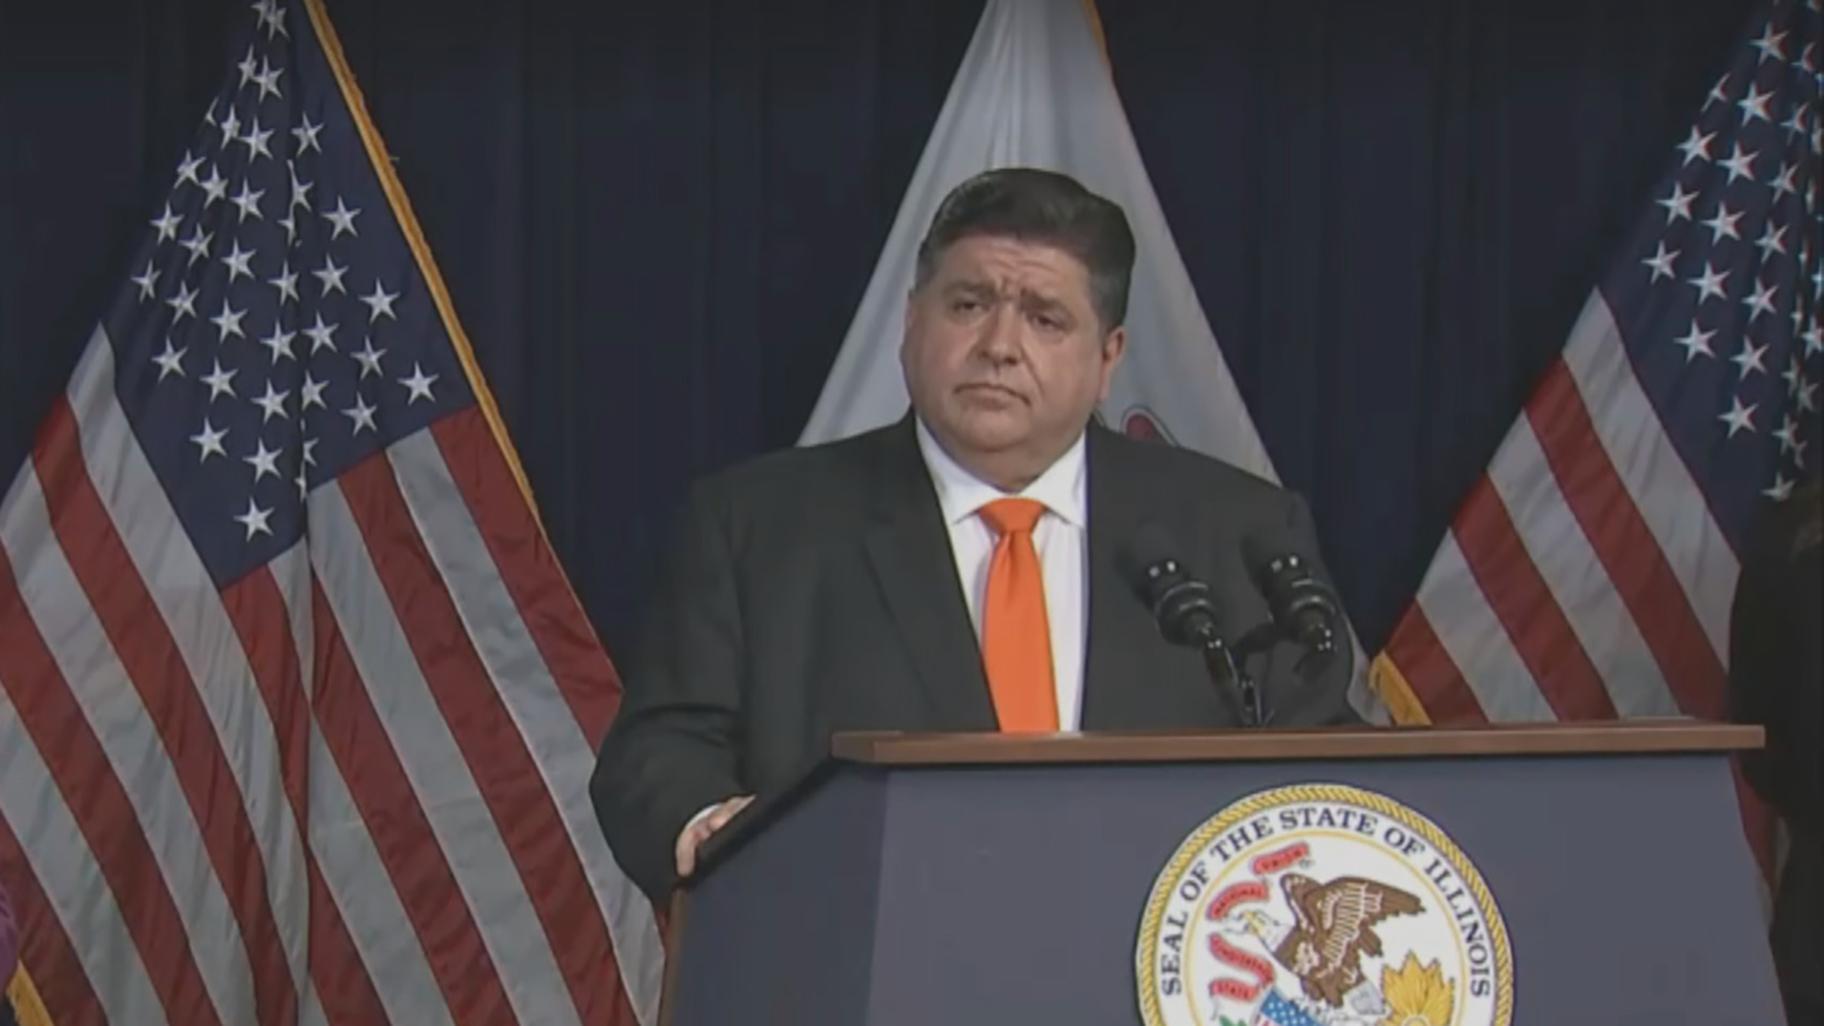 Gov. J.B. Pritzker announces that the state’s indoor mask mandate will be lifted on Feb. 28 during a press conference on Feb. 9, 2022. (WTTW News)